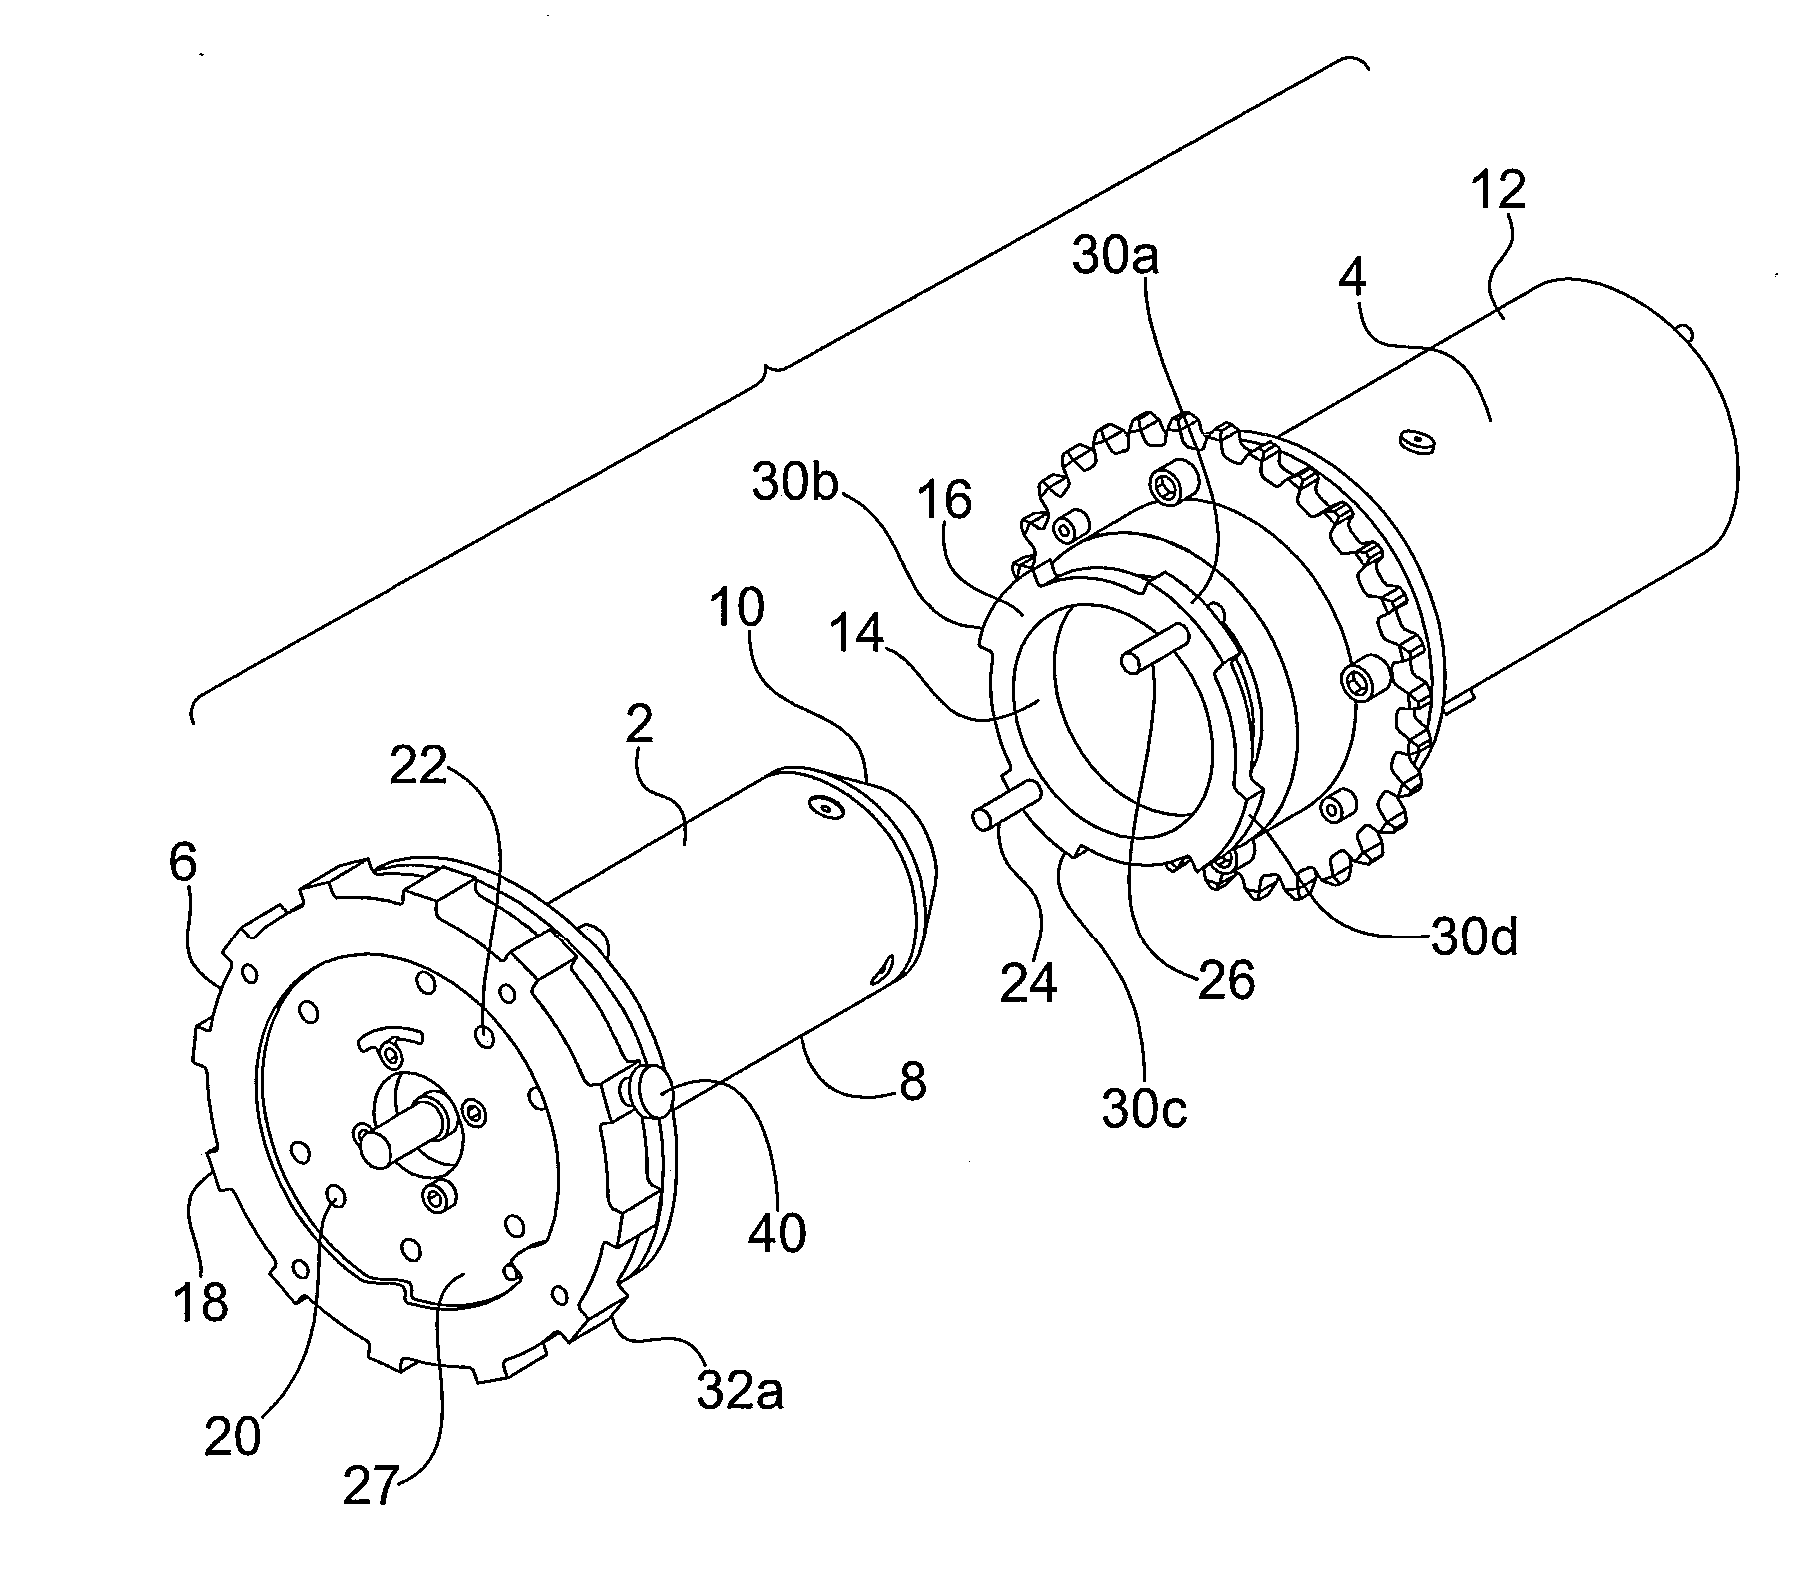 Robust Manual Connector for Robotic Arm End Effector